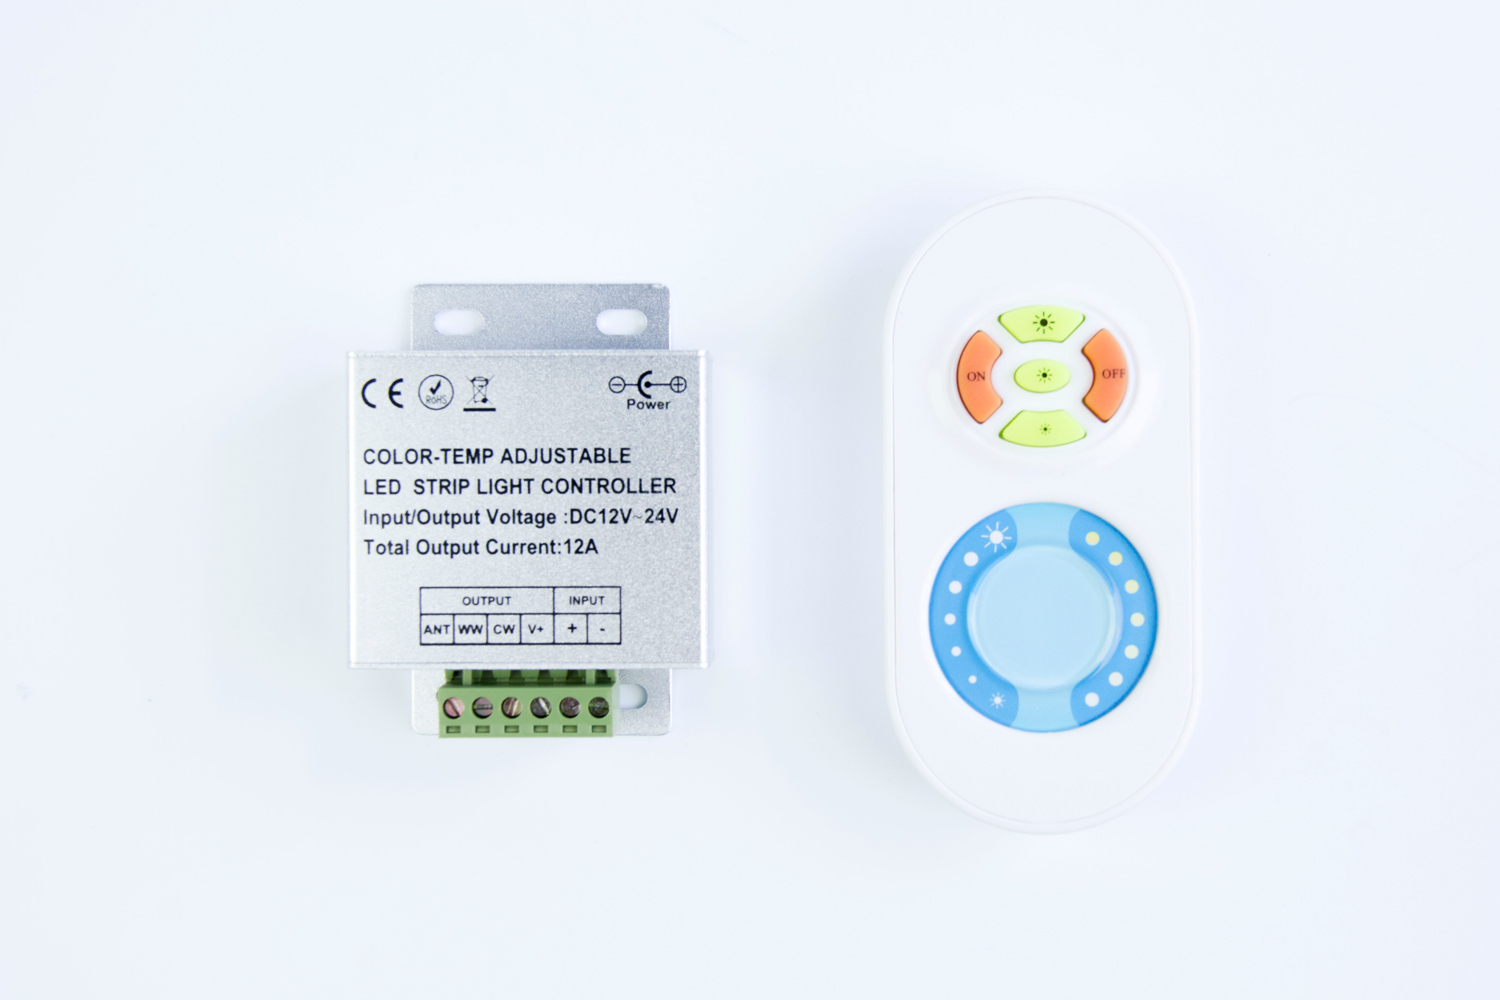 CCT Color-Temp Adjustable Dimmer Controller with RF Wireless Touch Remote_1